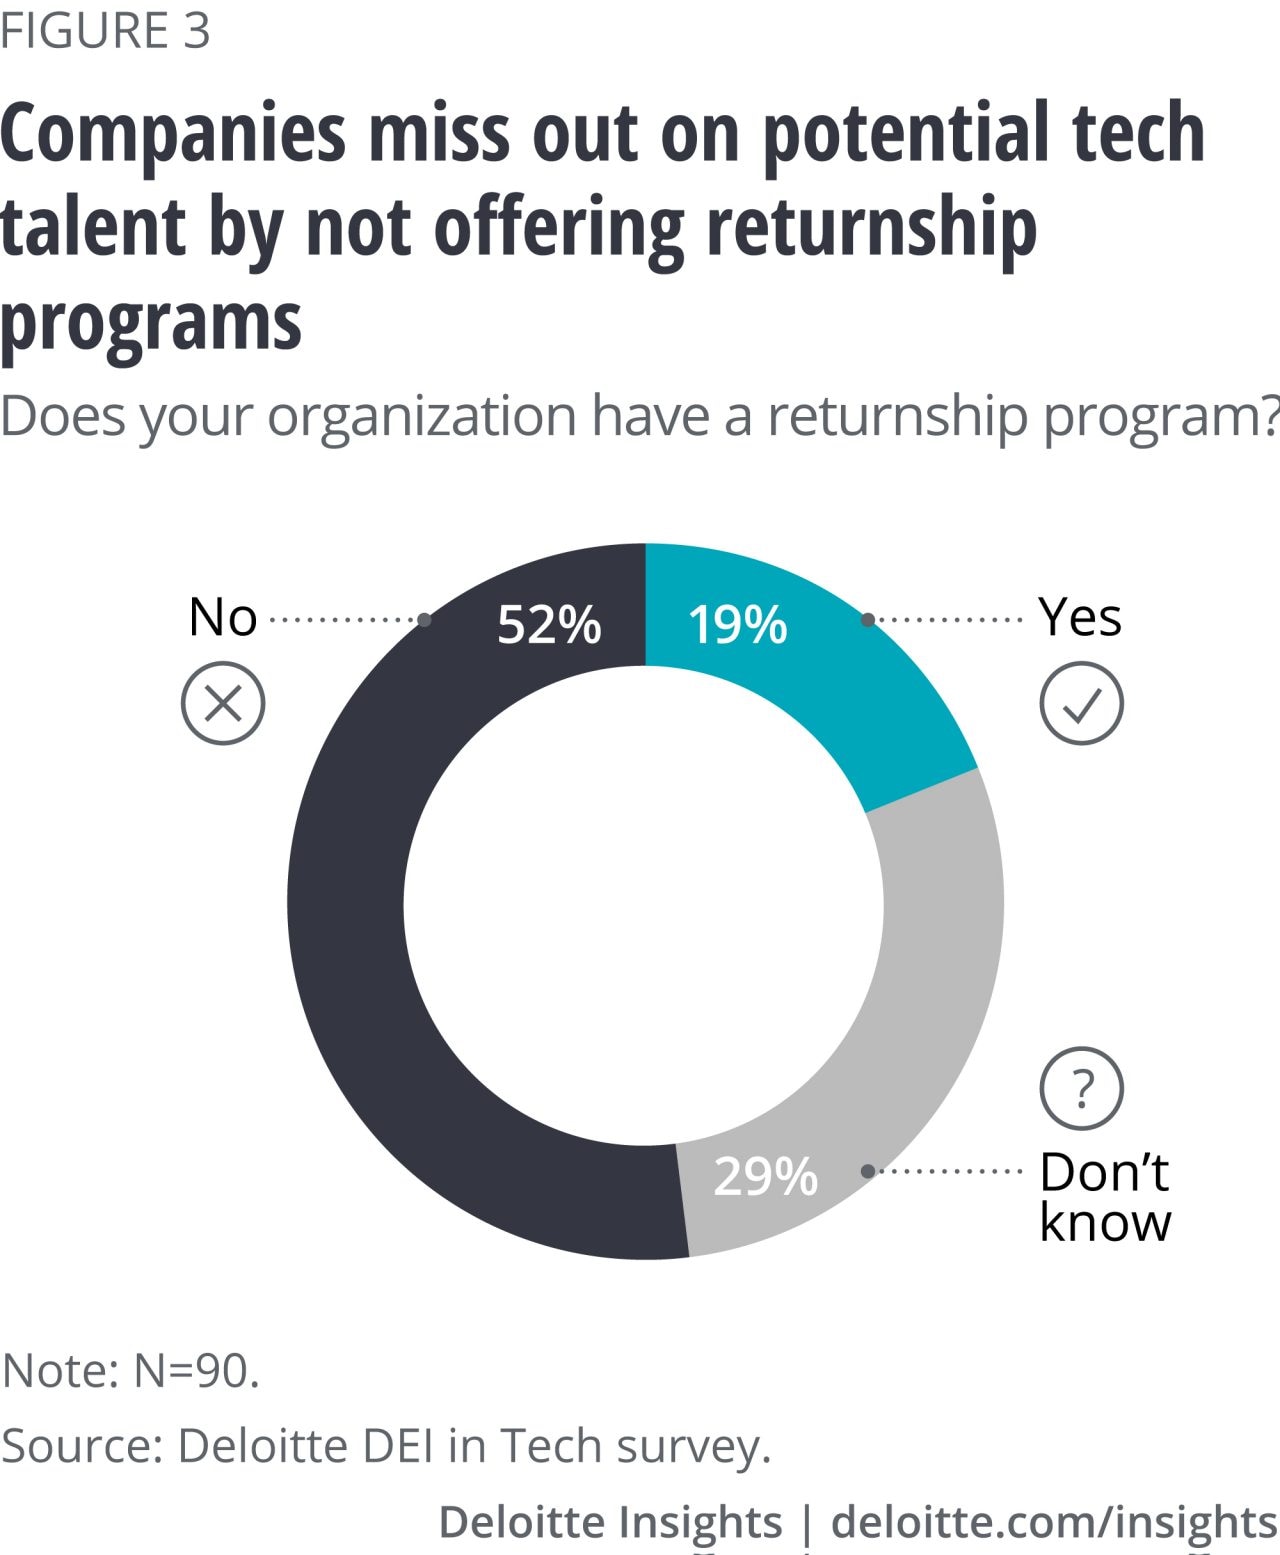 Figure 3. Companies miss out on potential tech talent by not offering returnship programs